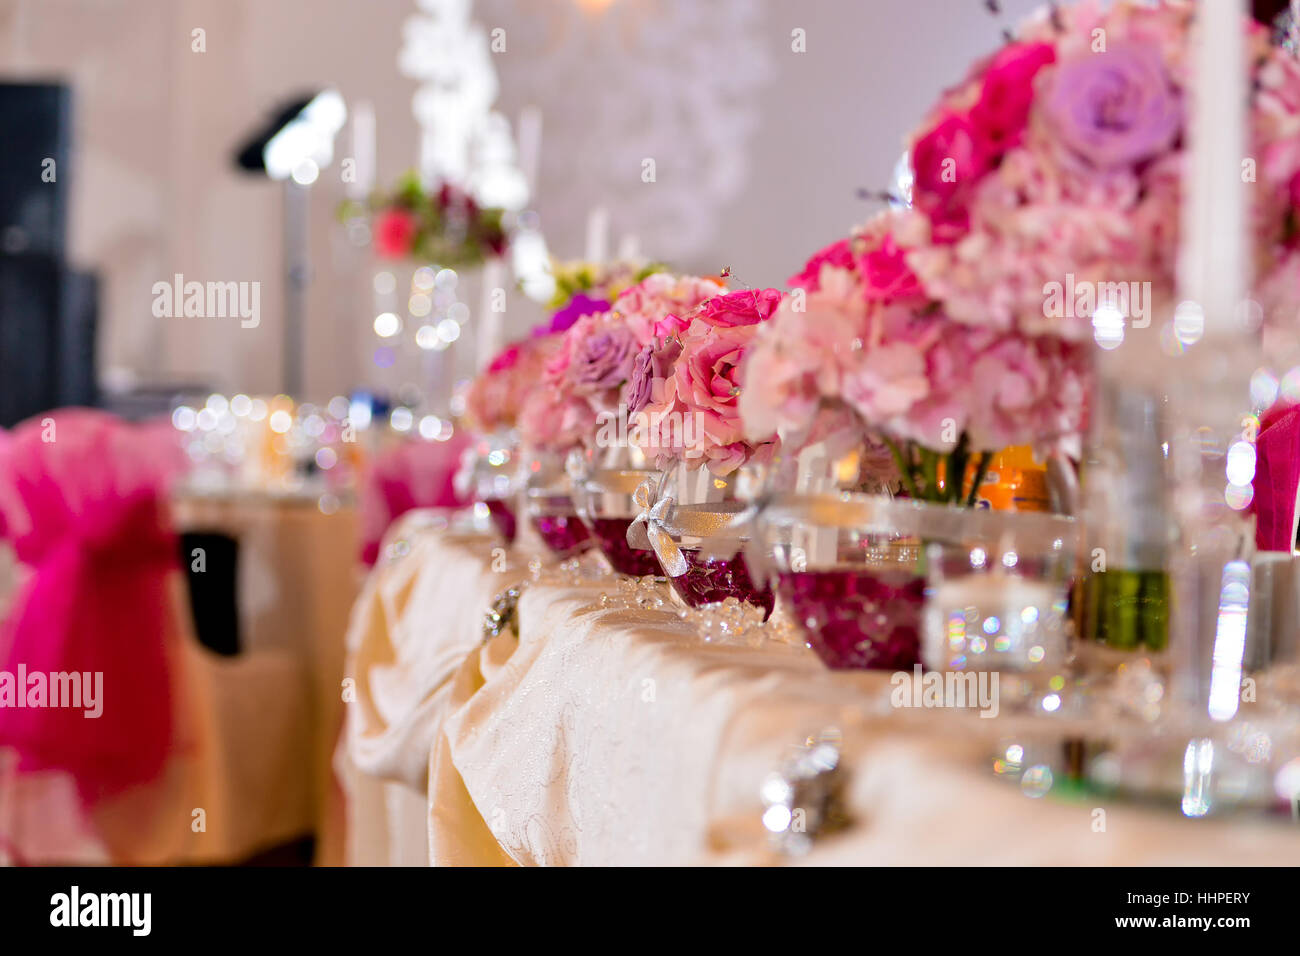 Arrangements with pink flowers on the table light side Stock Photo